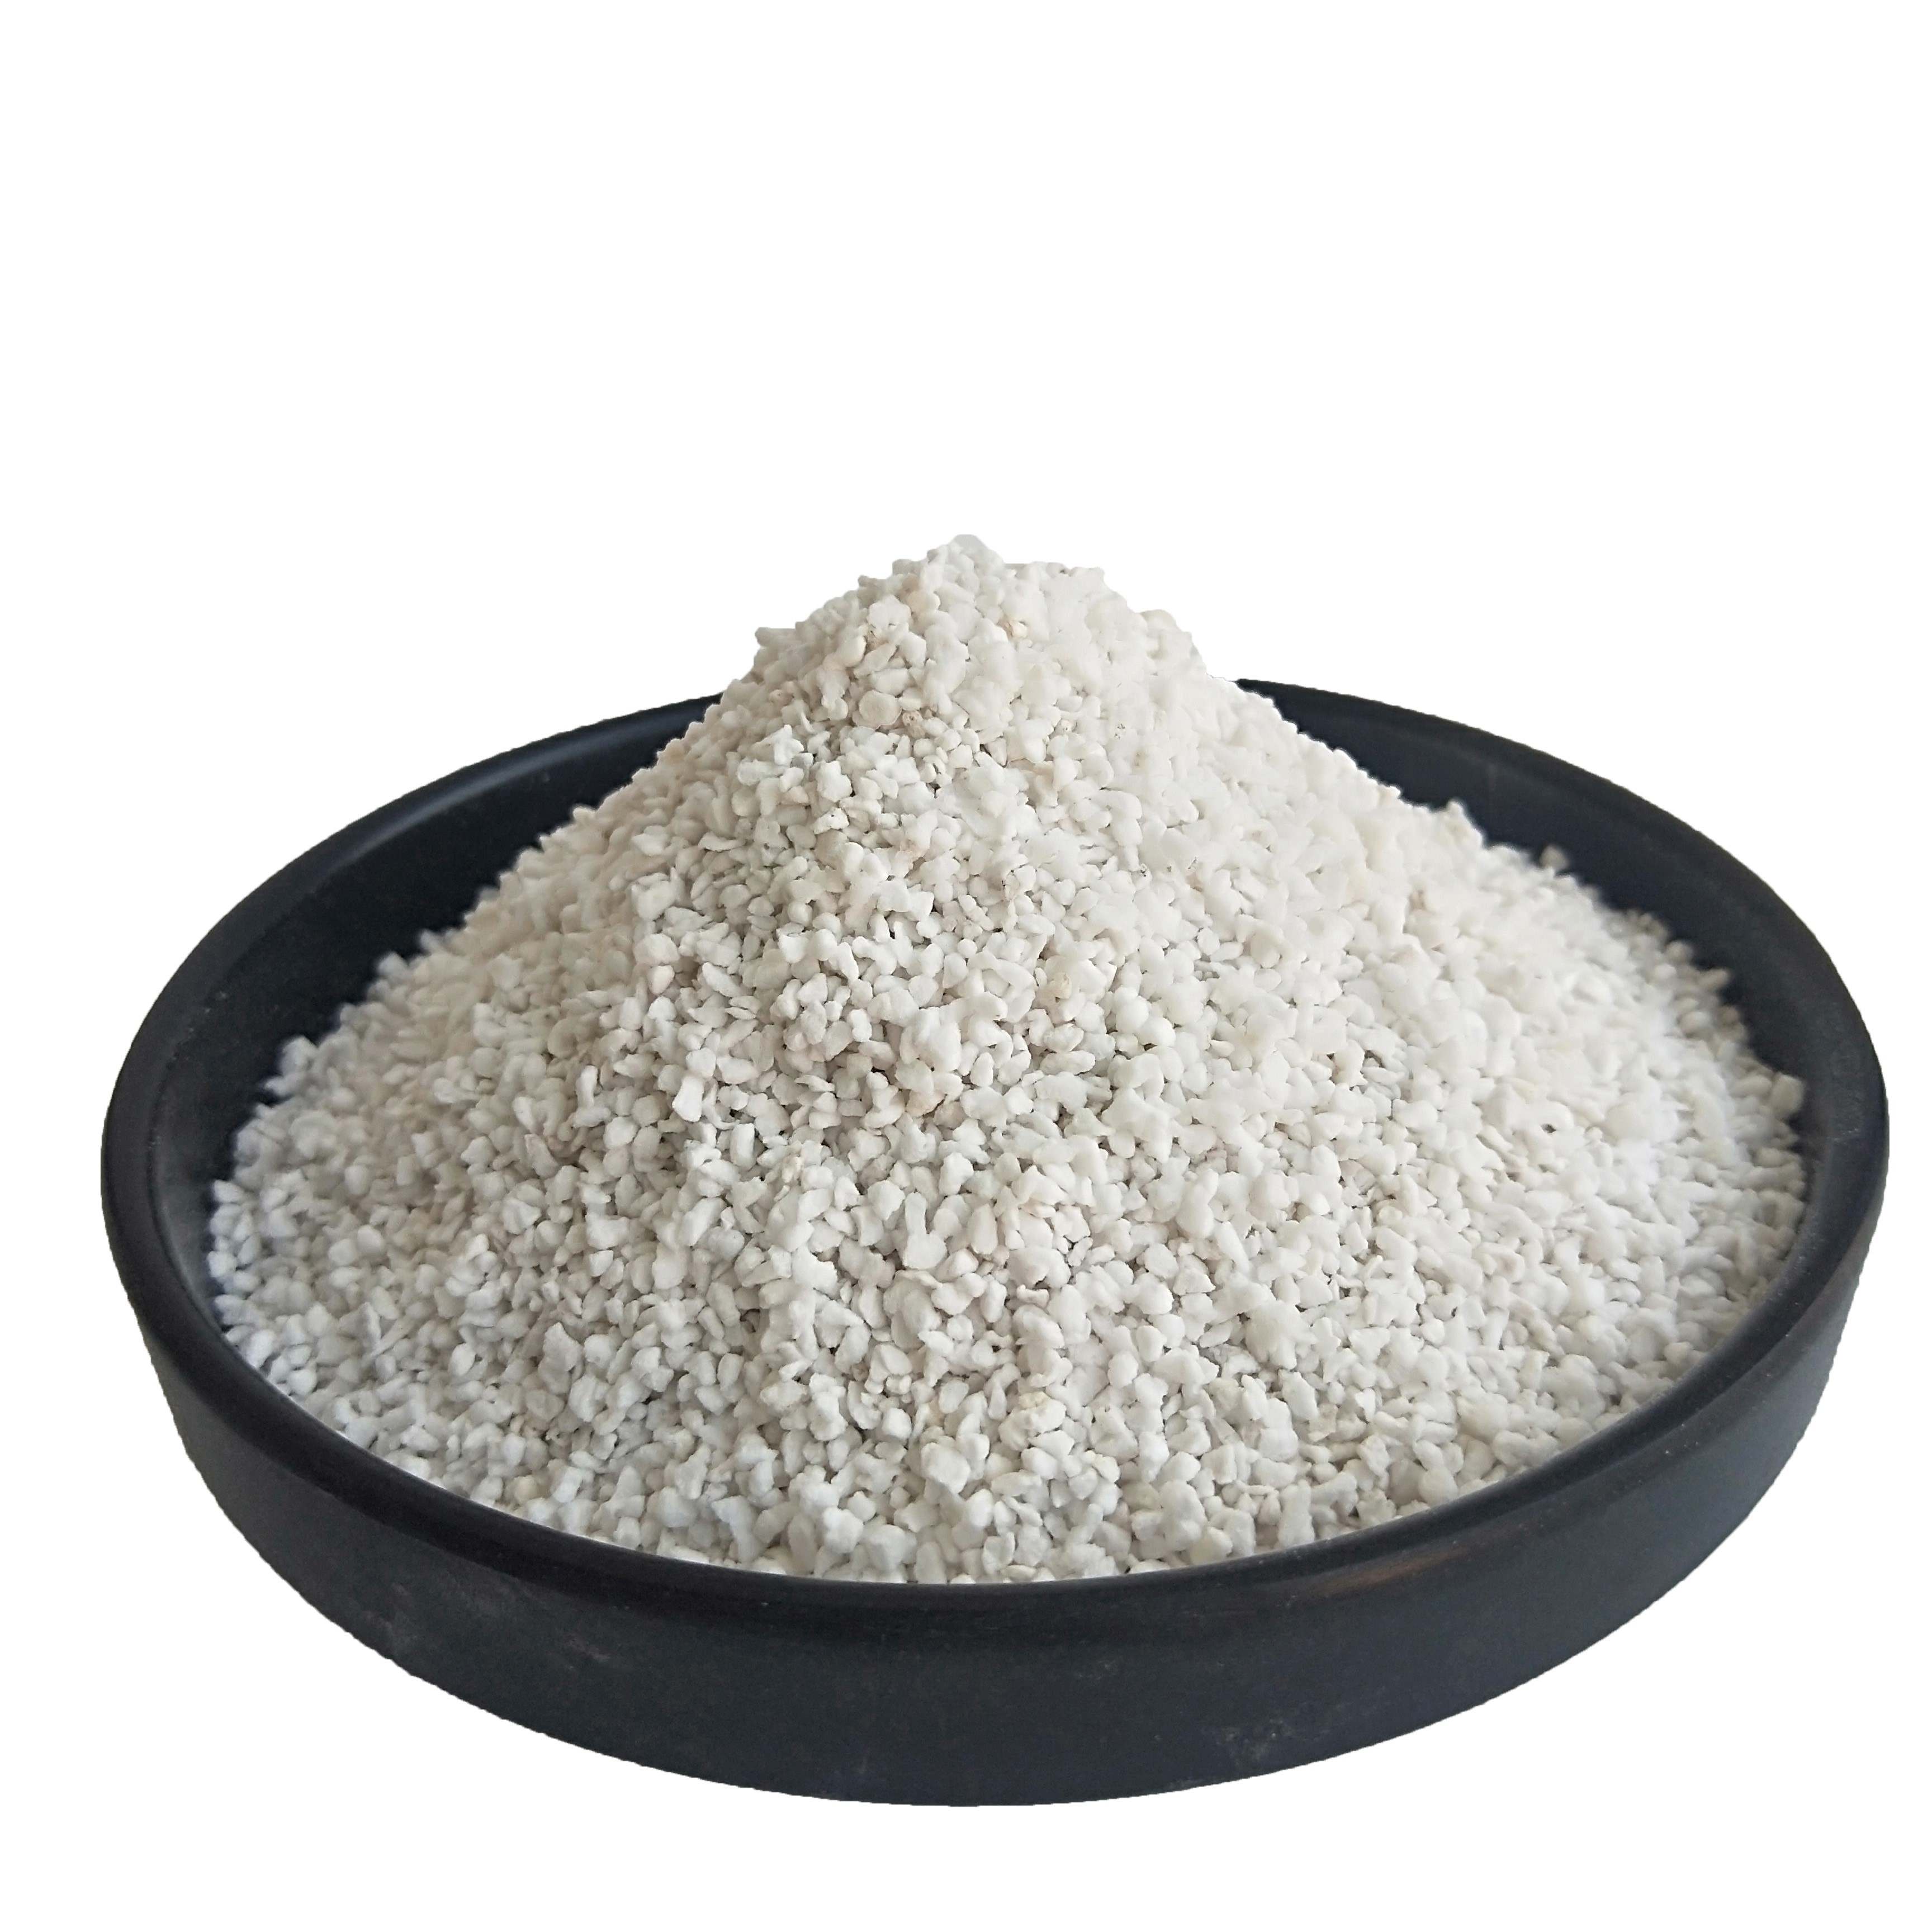 Low density 1-3mm construction expanded perlite